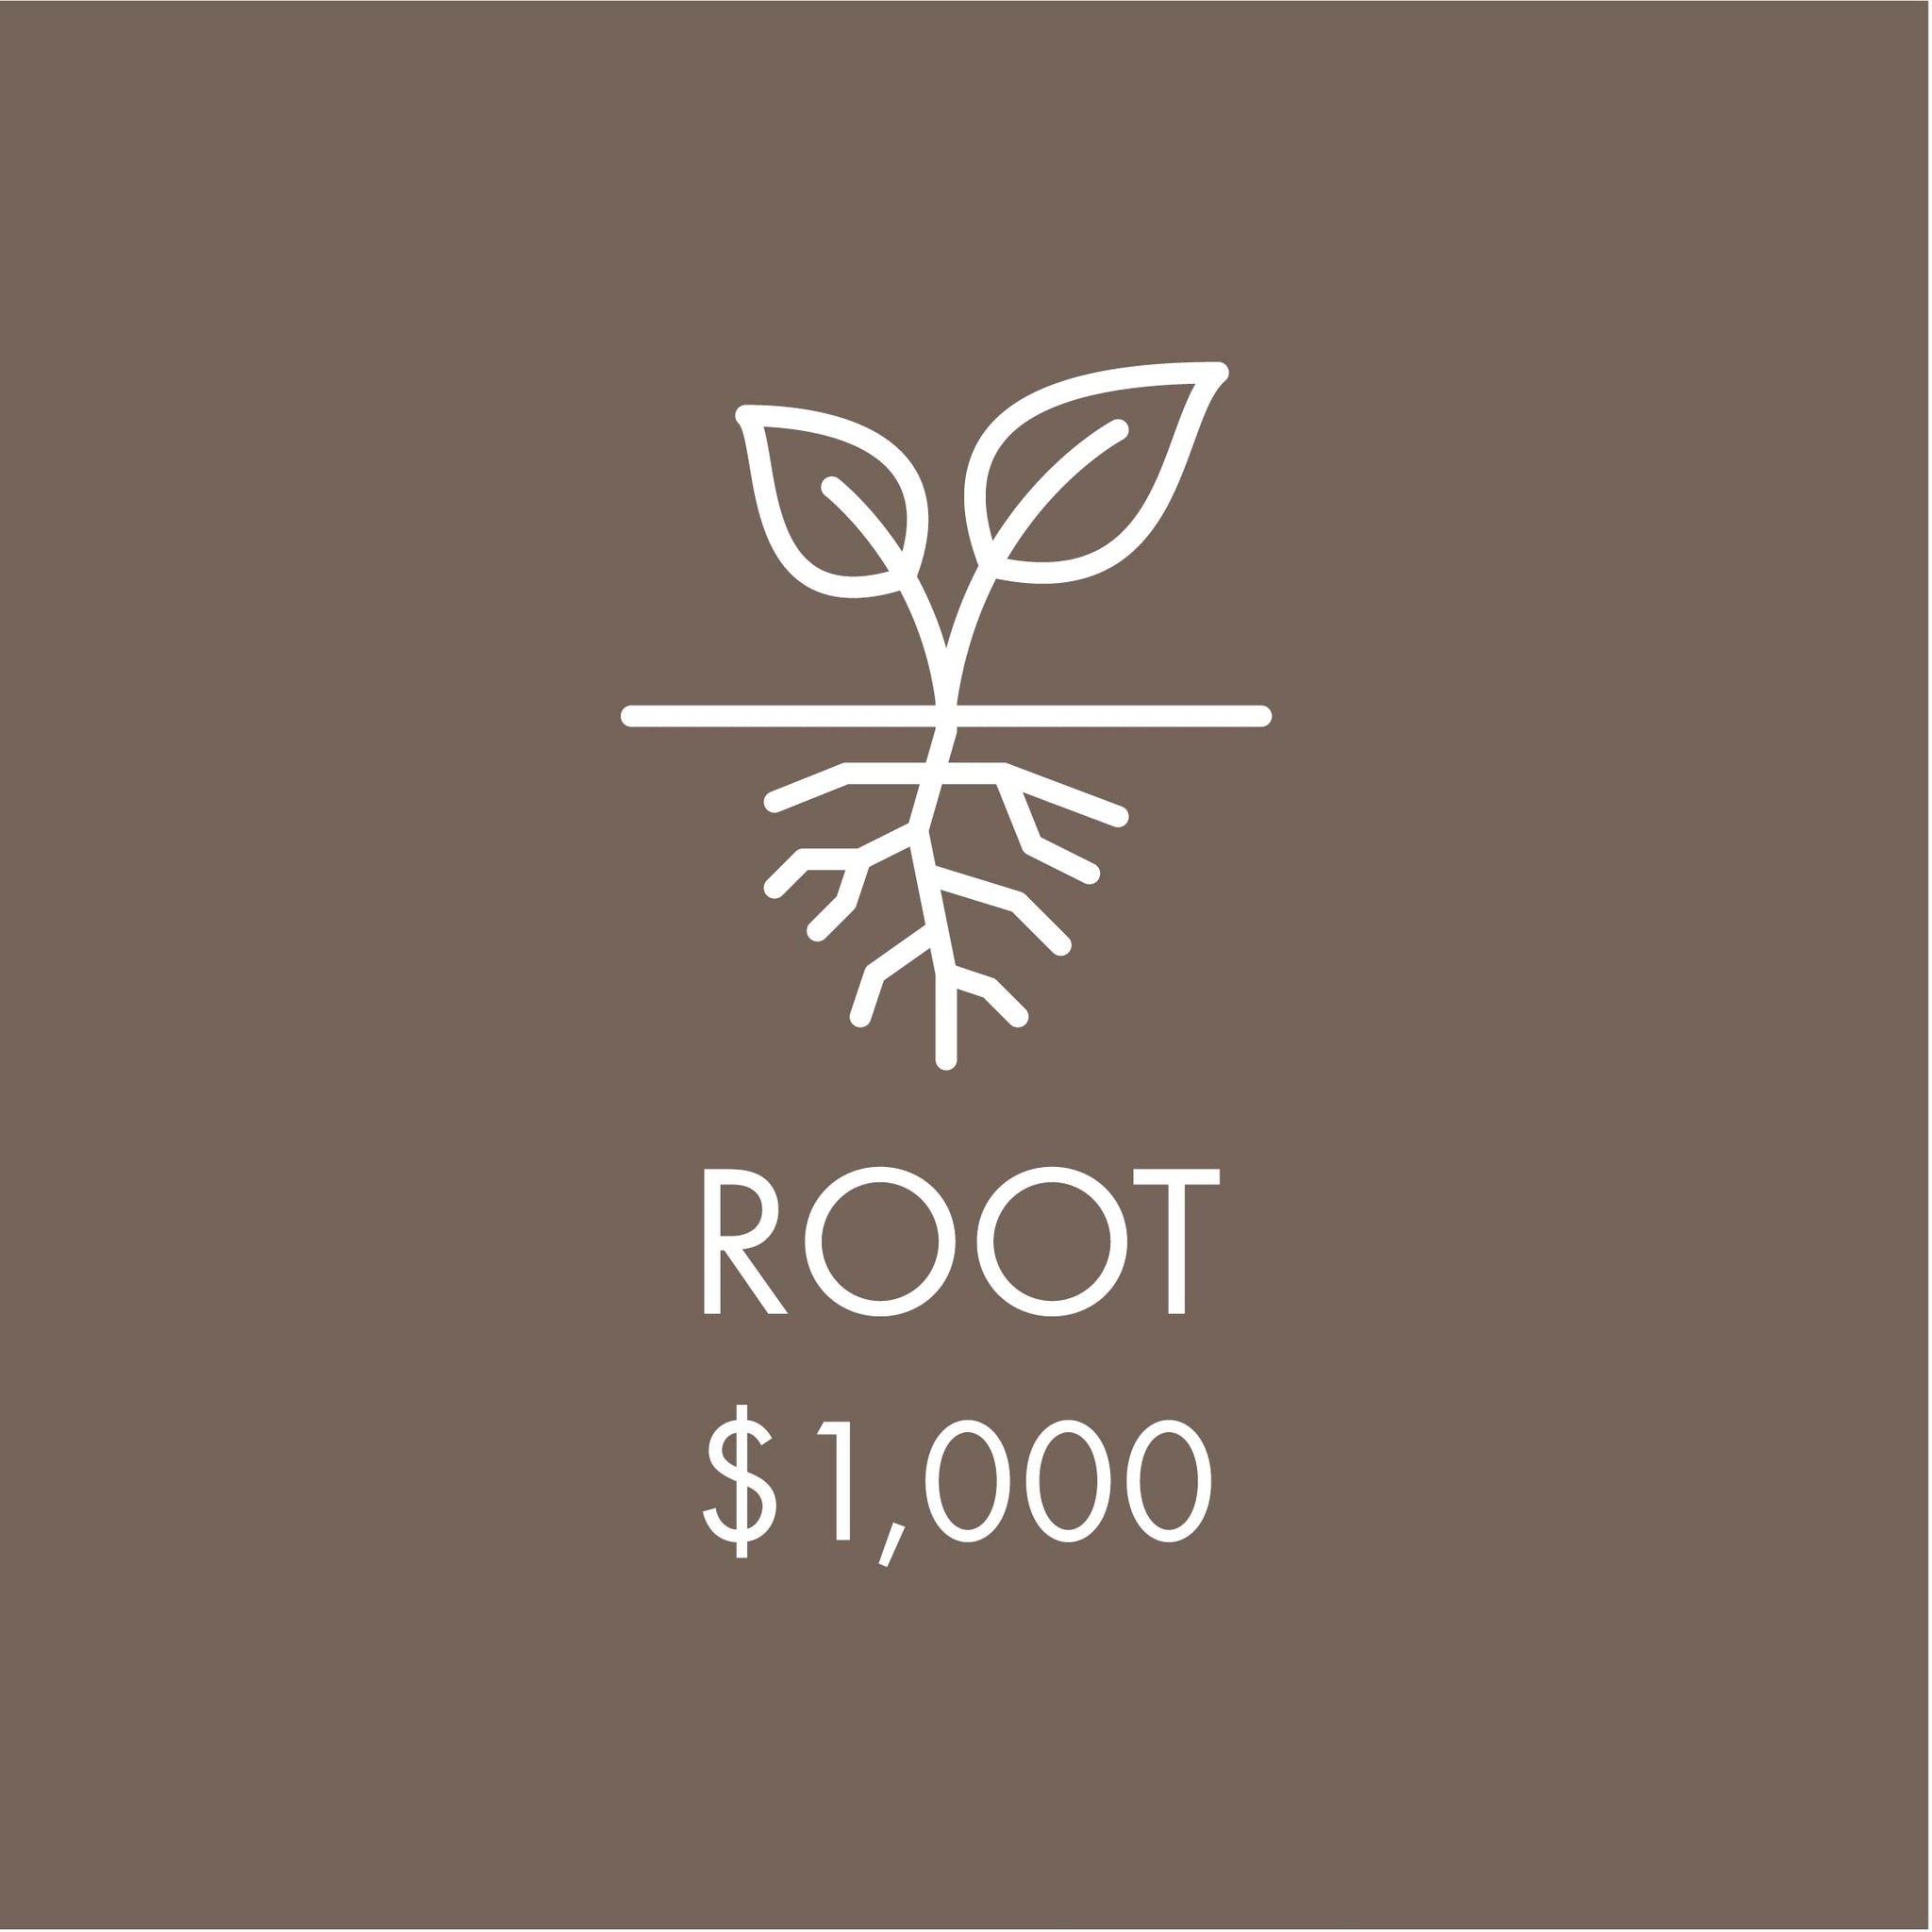 Support LongHouse - Root $1,000